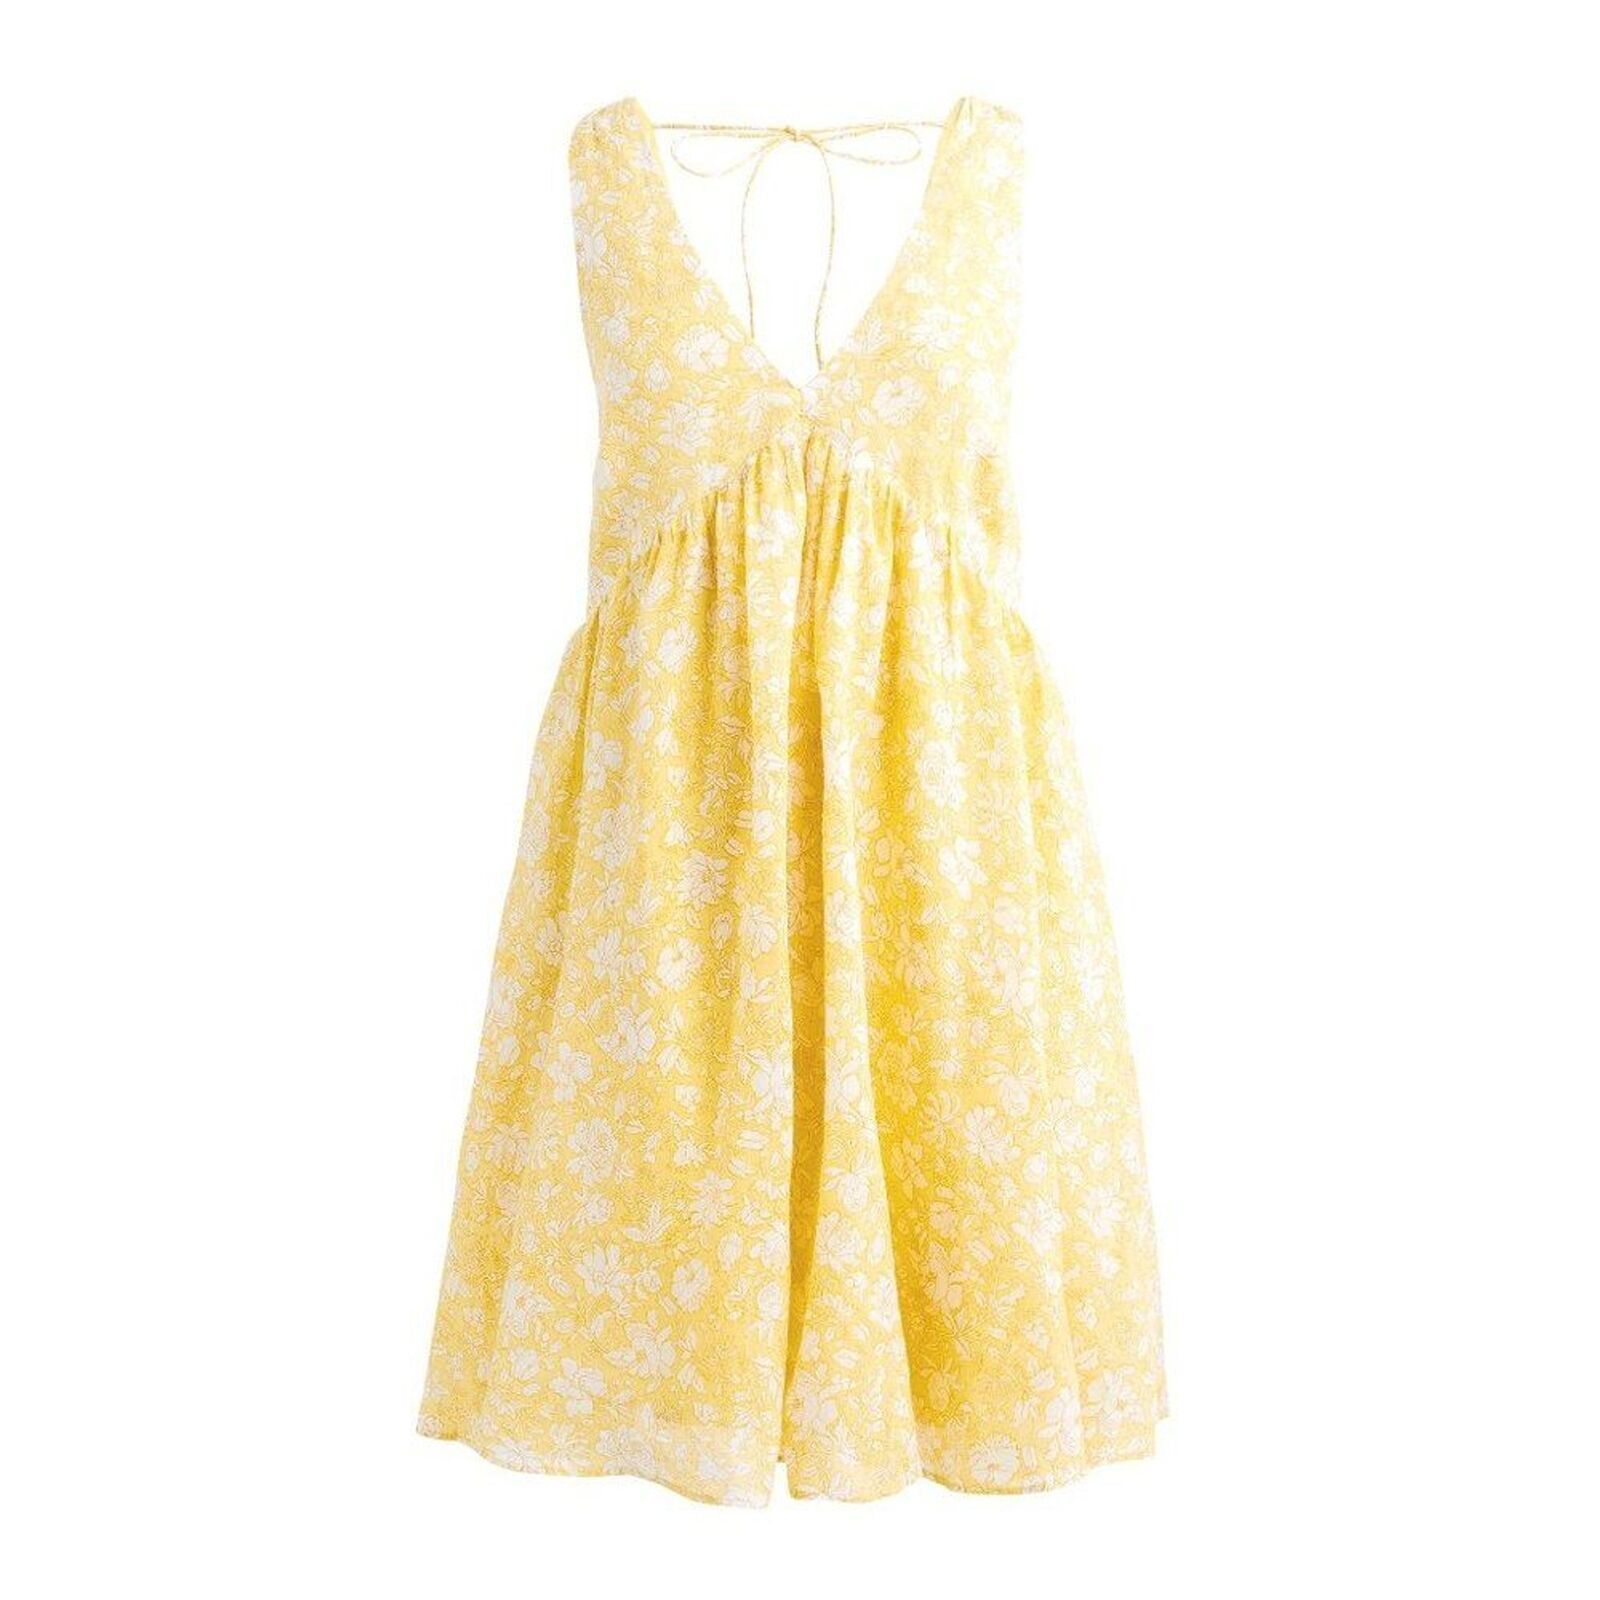 Primary image for NWT Womens Size Small J. Crew Yellow Swingy V-neck Mini Dress in Tossed Floral